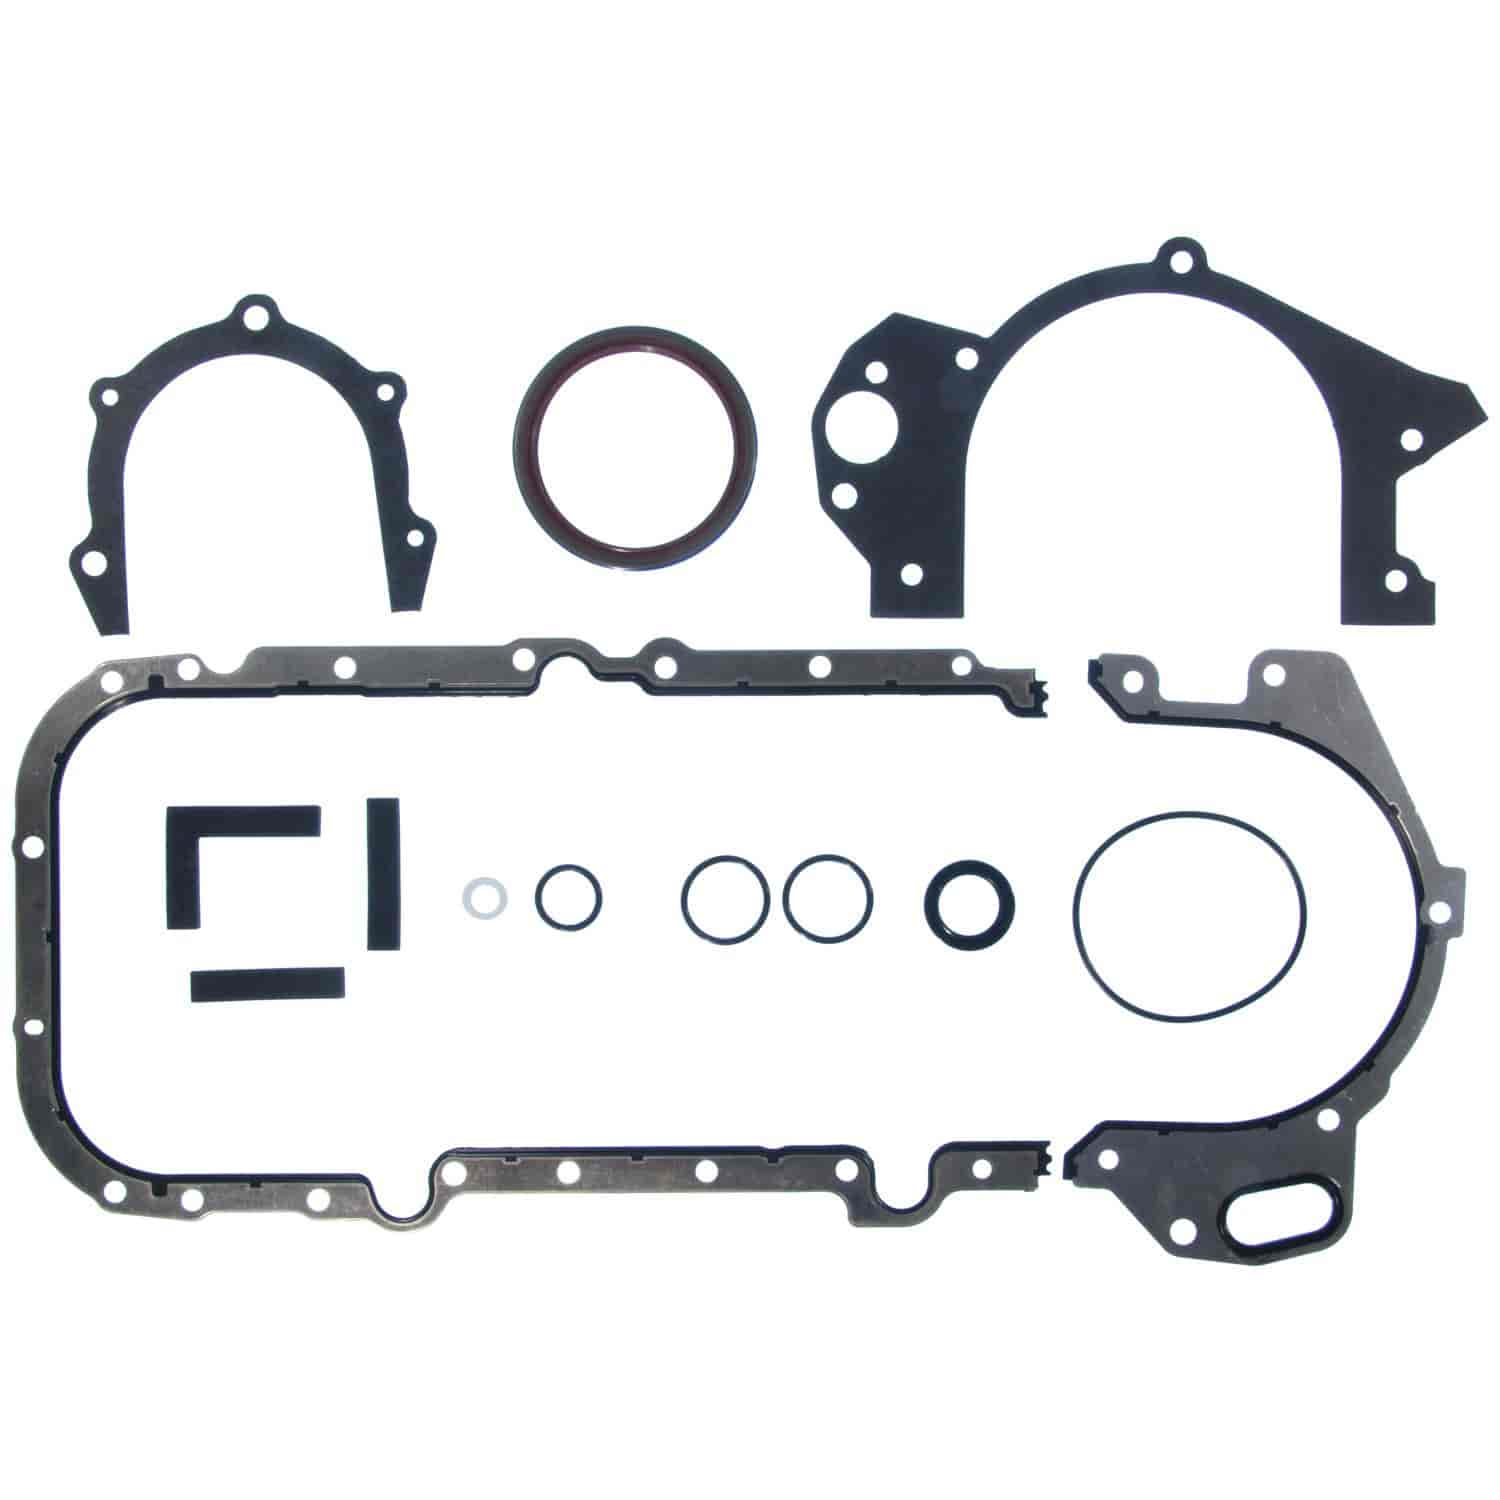 Conversion Set Chry-Pass 215 3.5L Eng. 2004 Pacifica Only